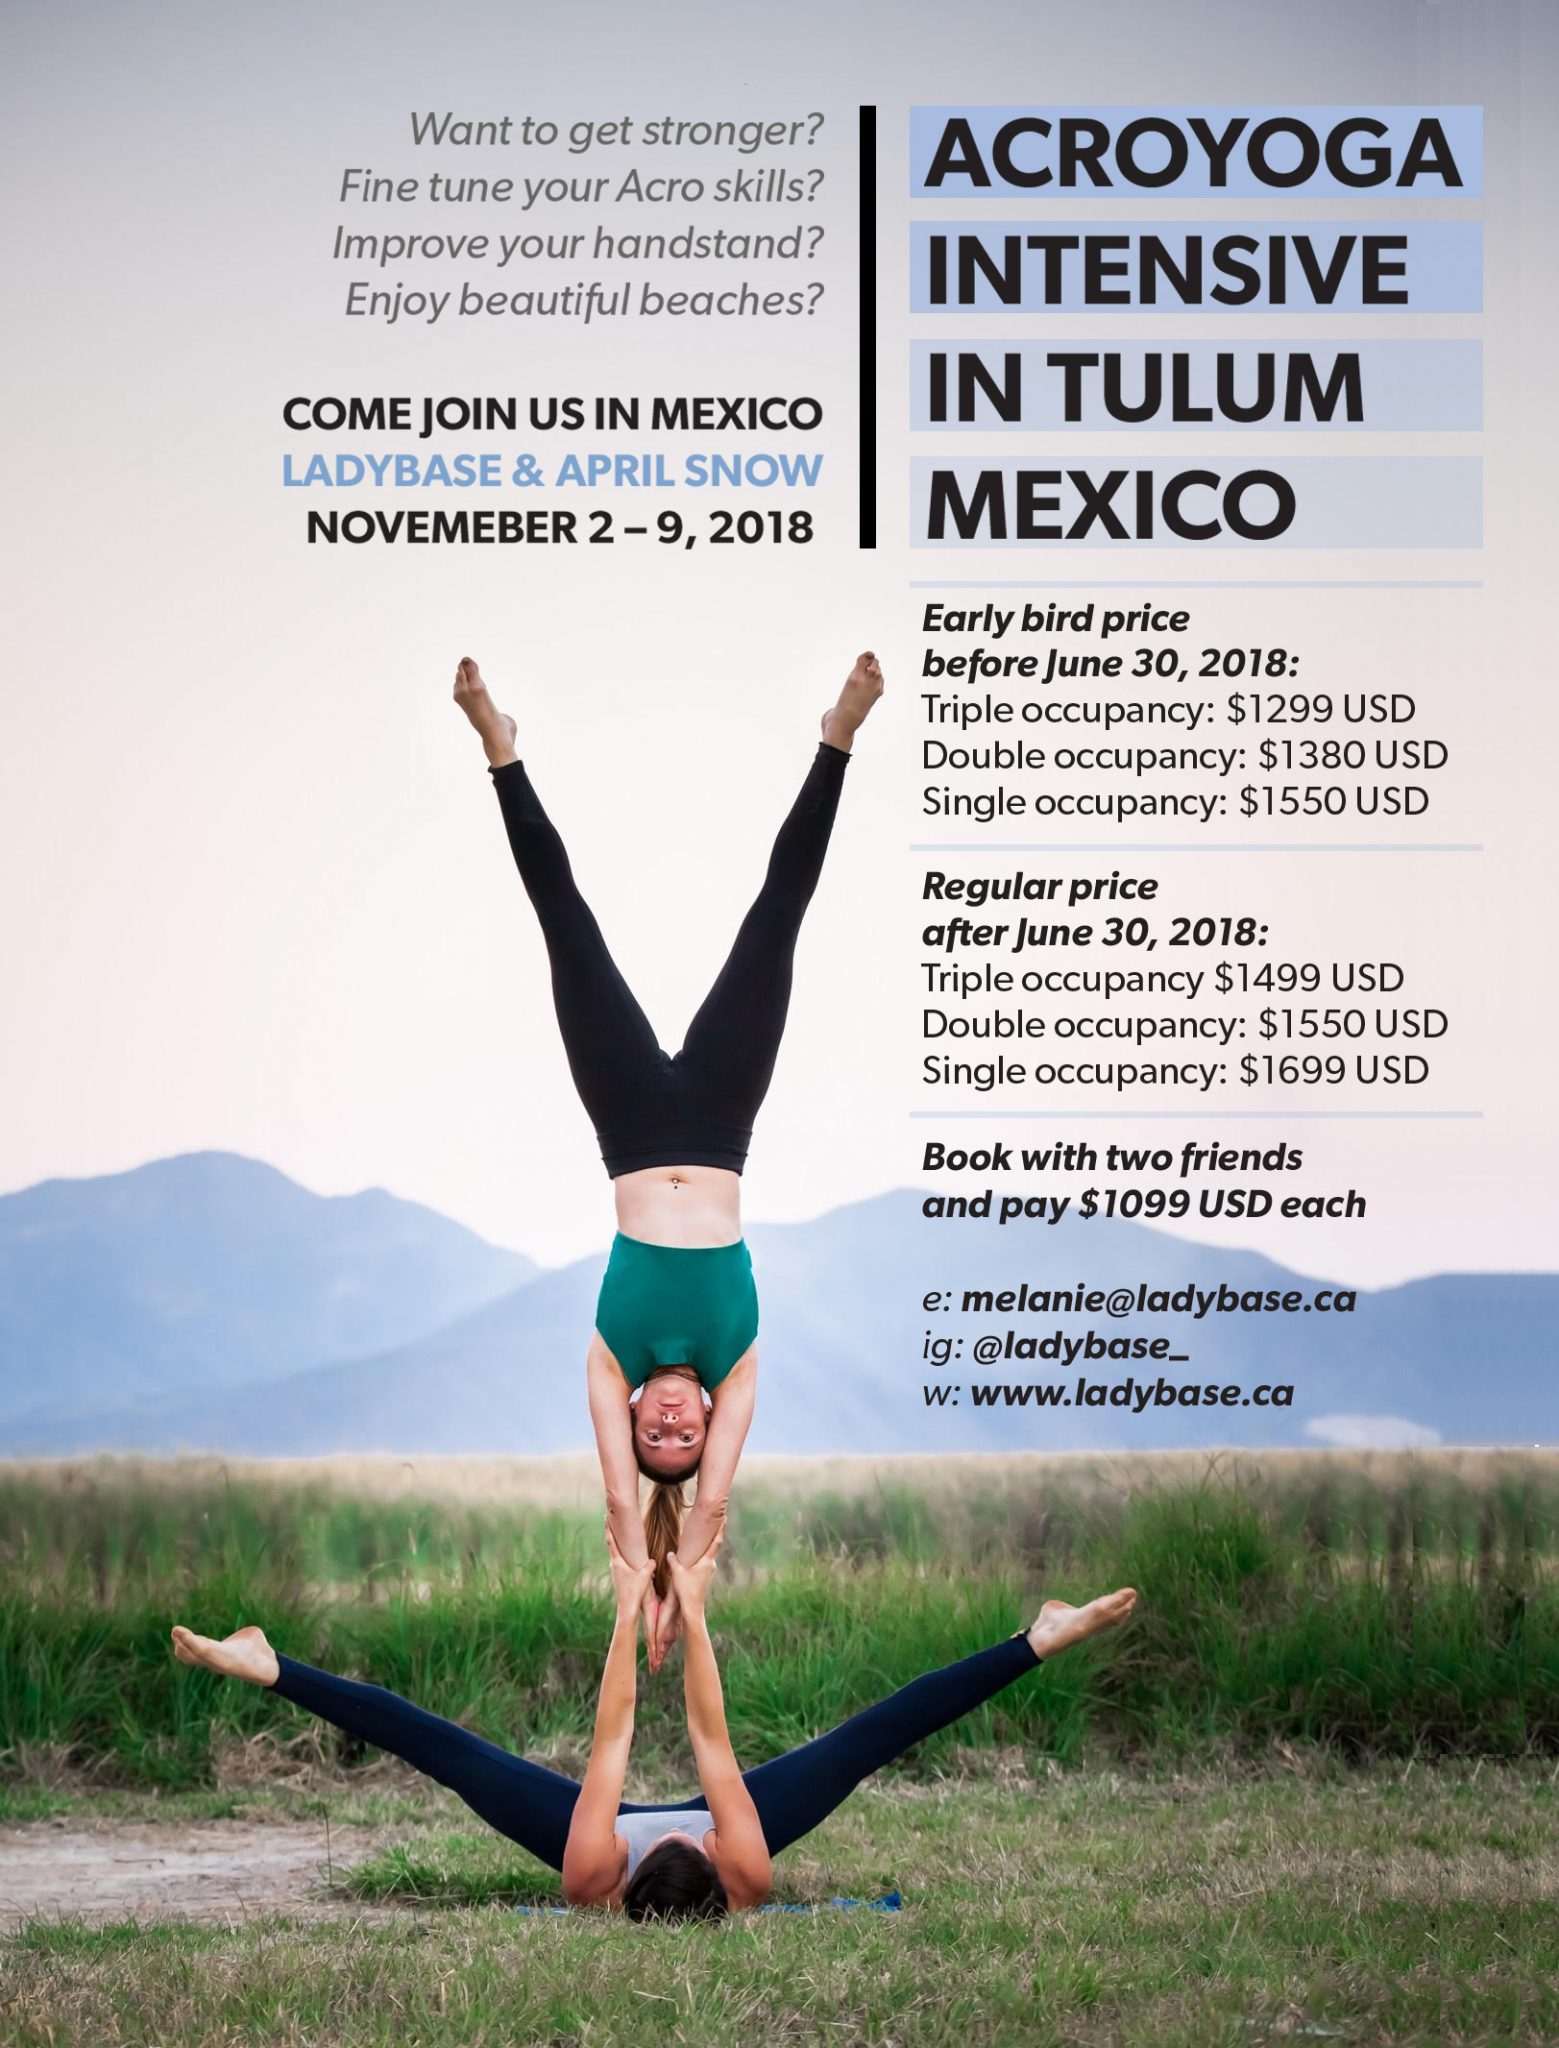 Acroyoga Intensive in Tulum with Ladybase and April Snow